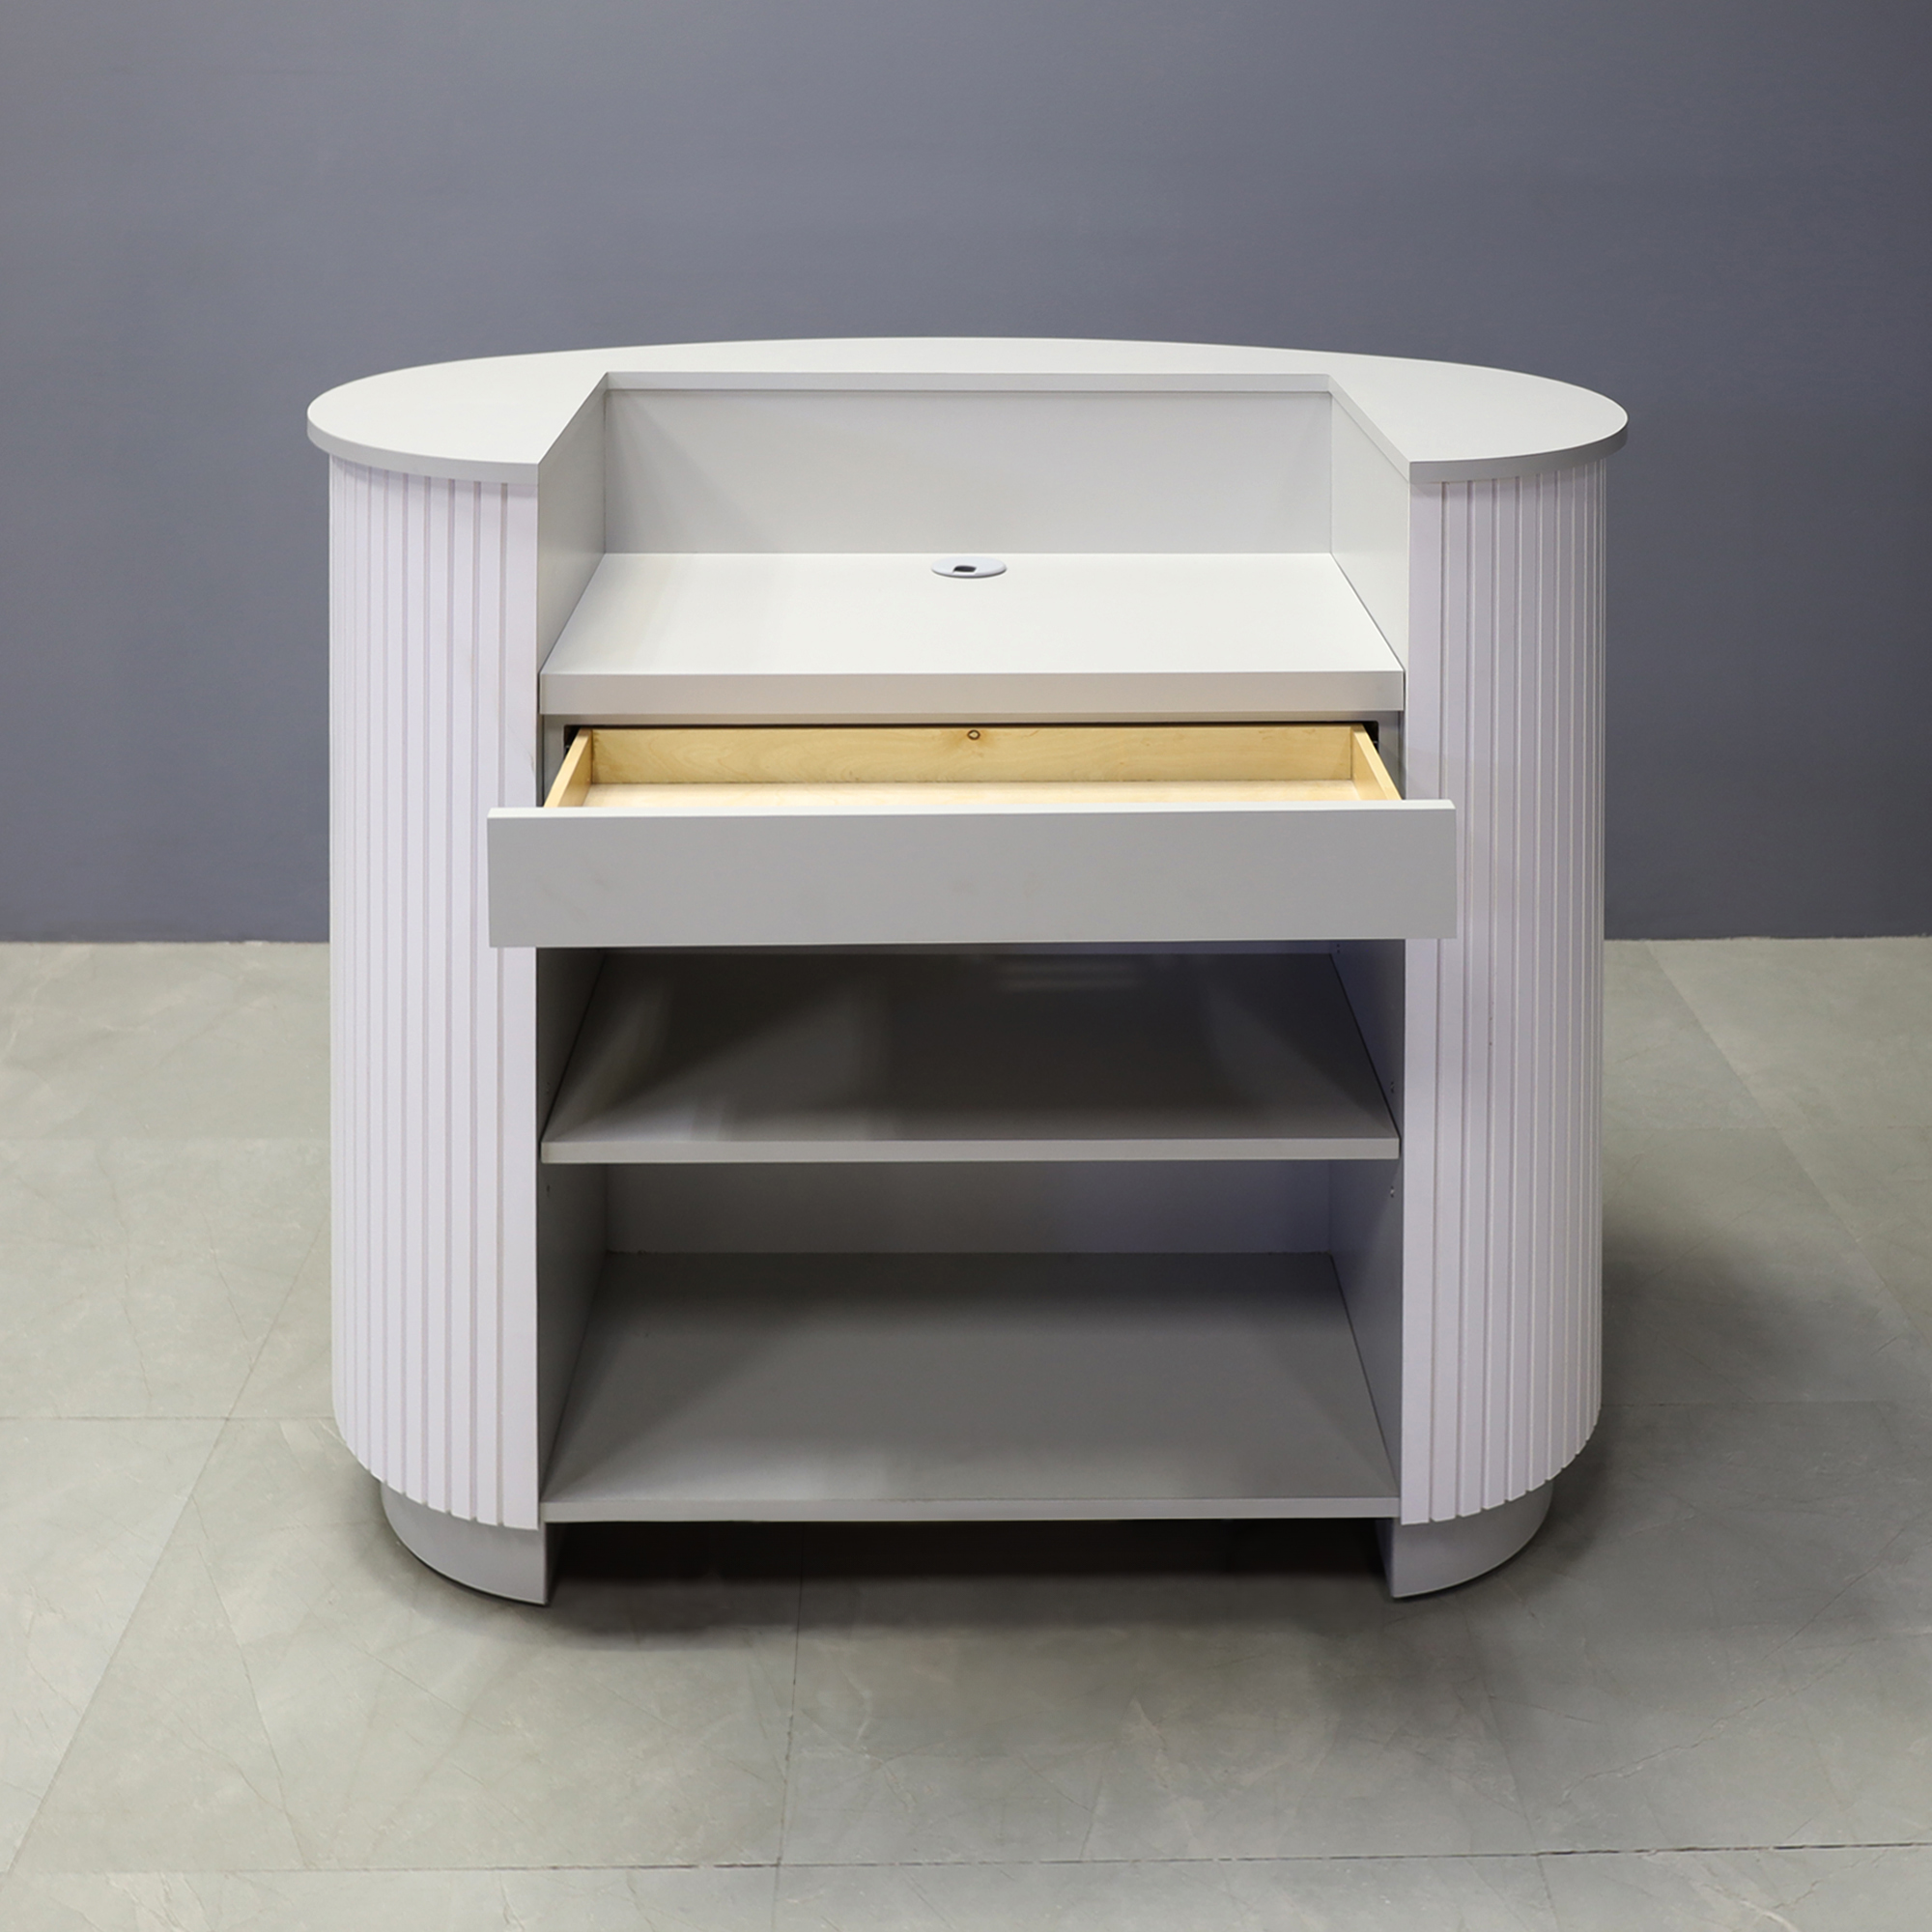 48-inch The Pill Podium & Host Custom Desk infolkstone gray matte laminate top counter, workspace and toe-kick, with white tambour front desk. Built-in pencil drawer and adjustable shelf, shown here.